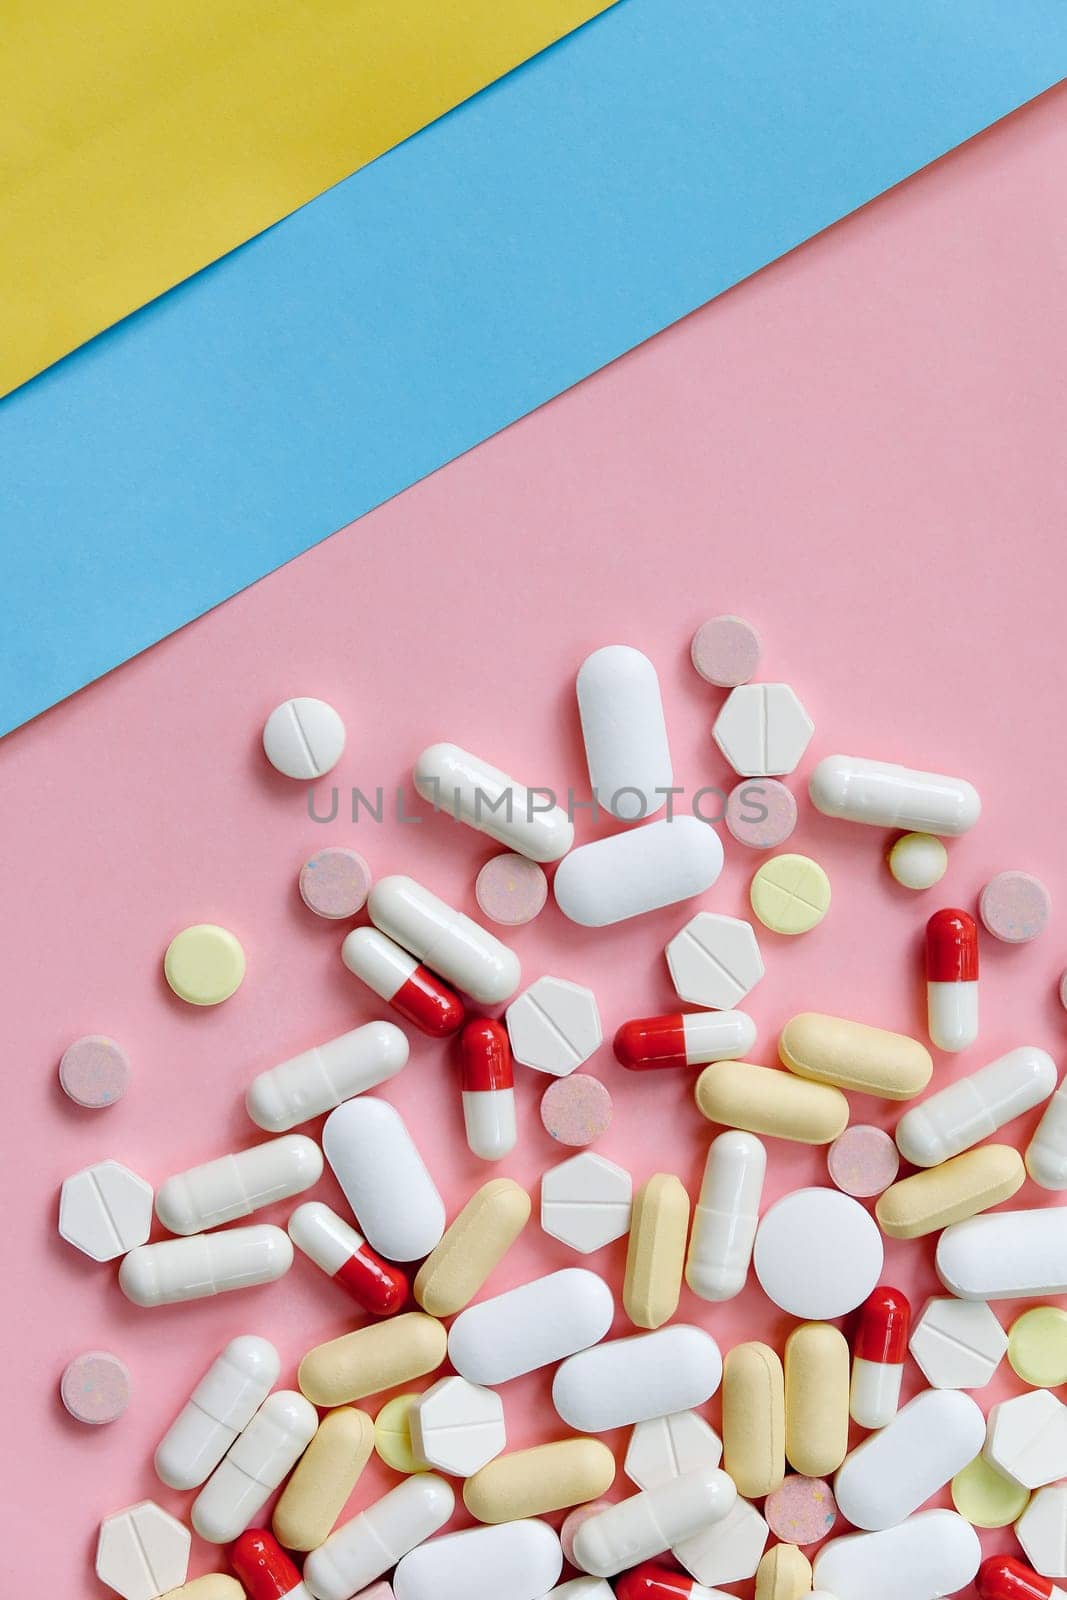 Colorful Assortment Of Medicine by ponsulak